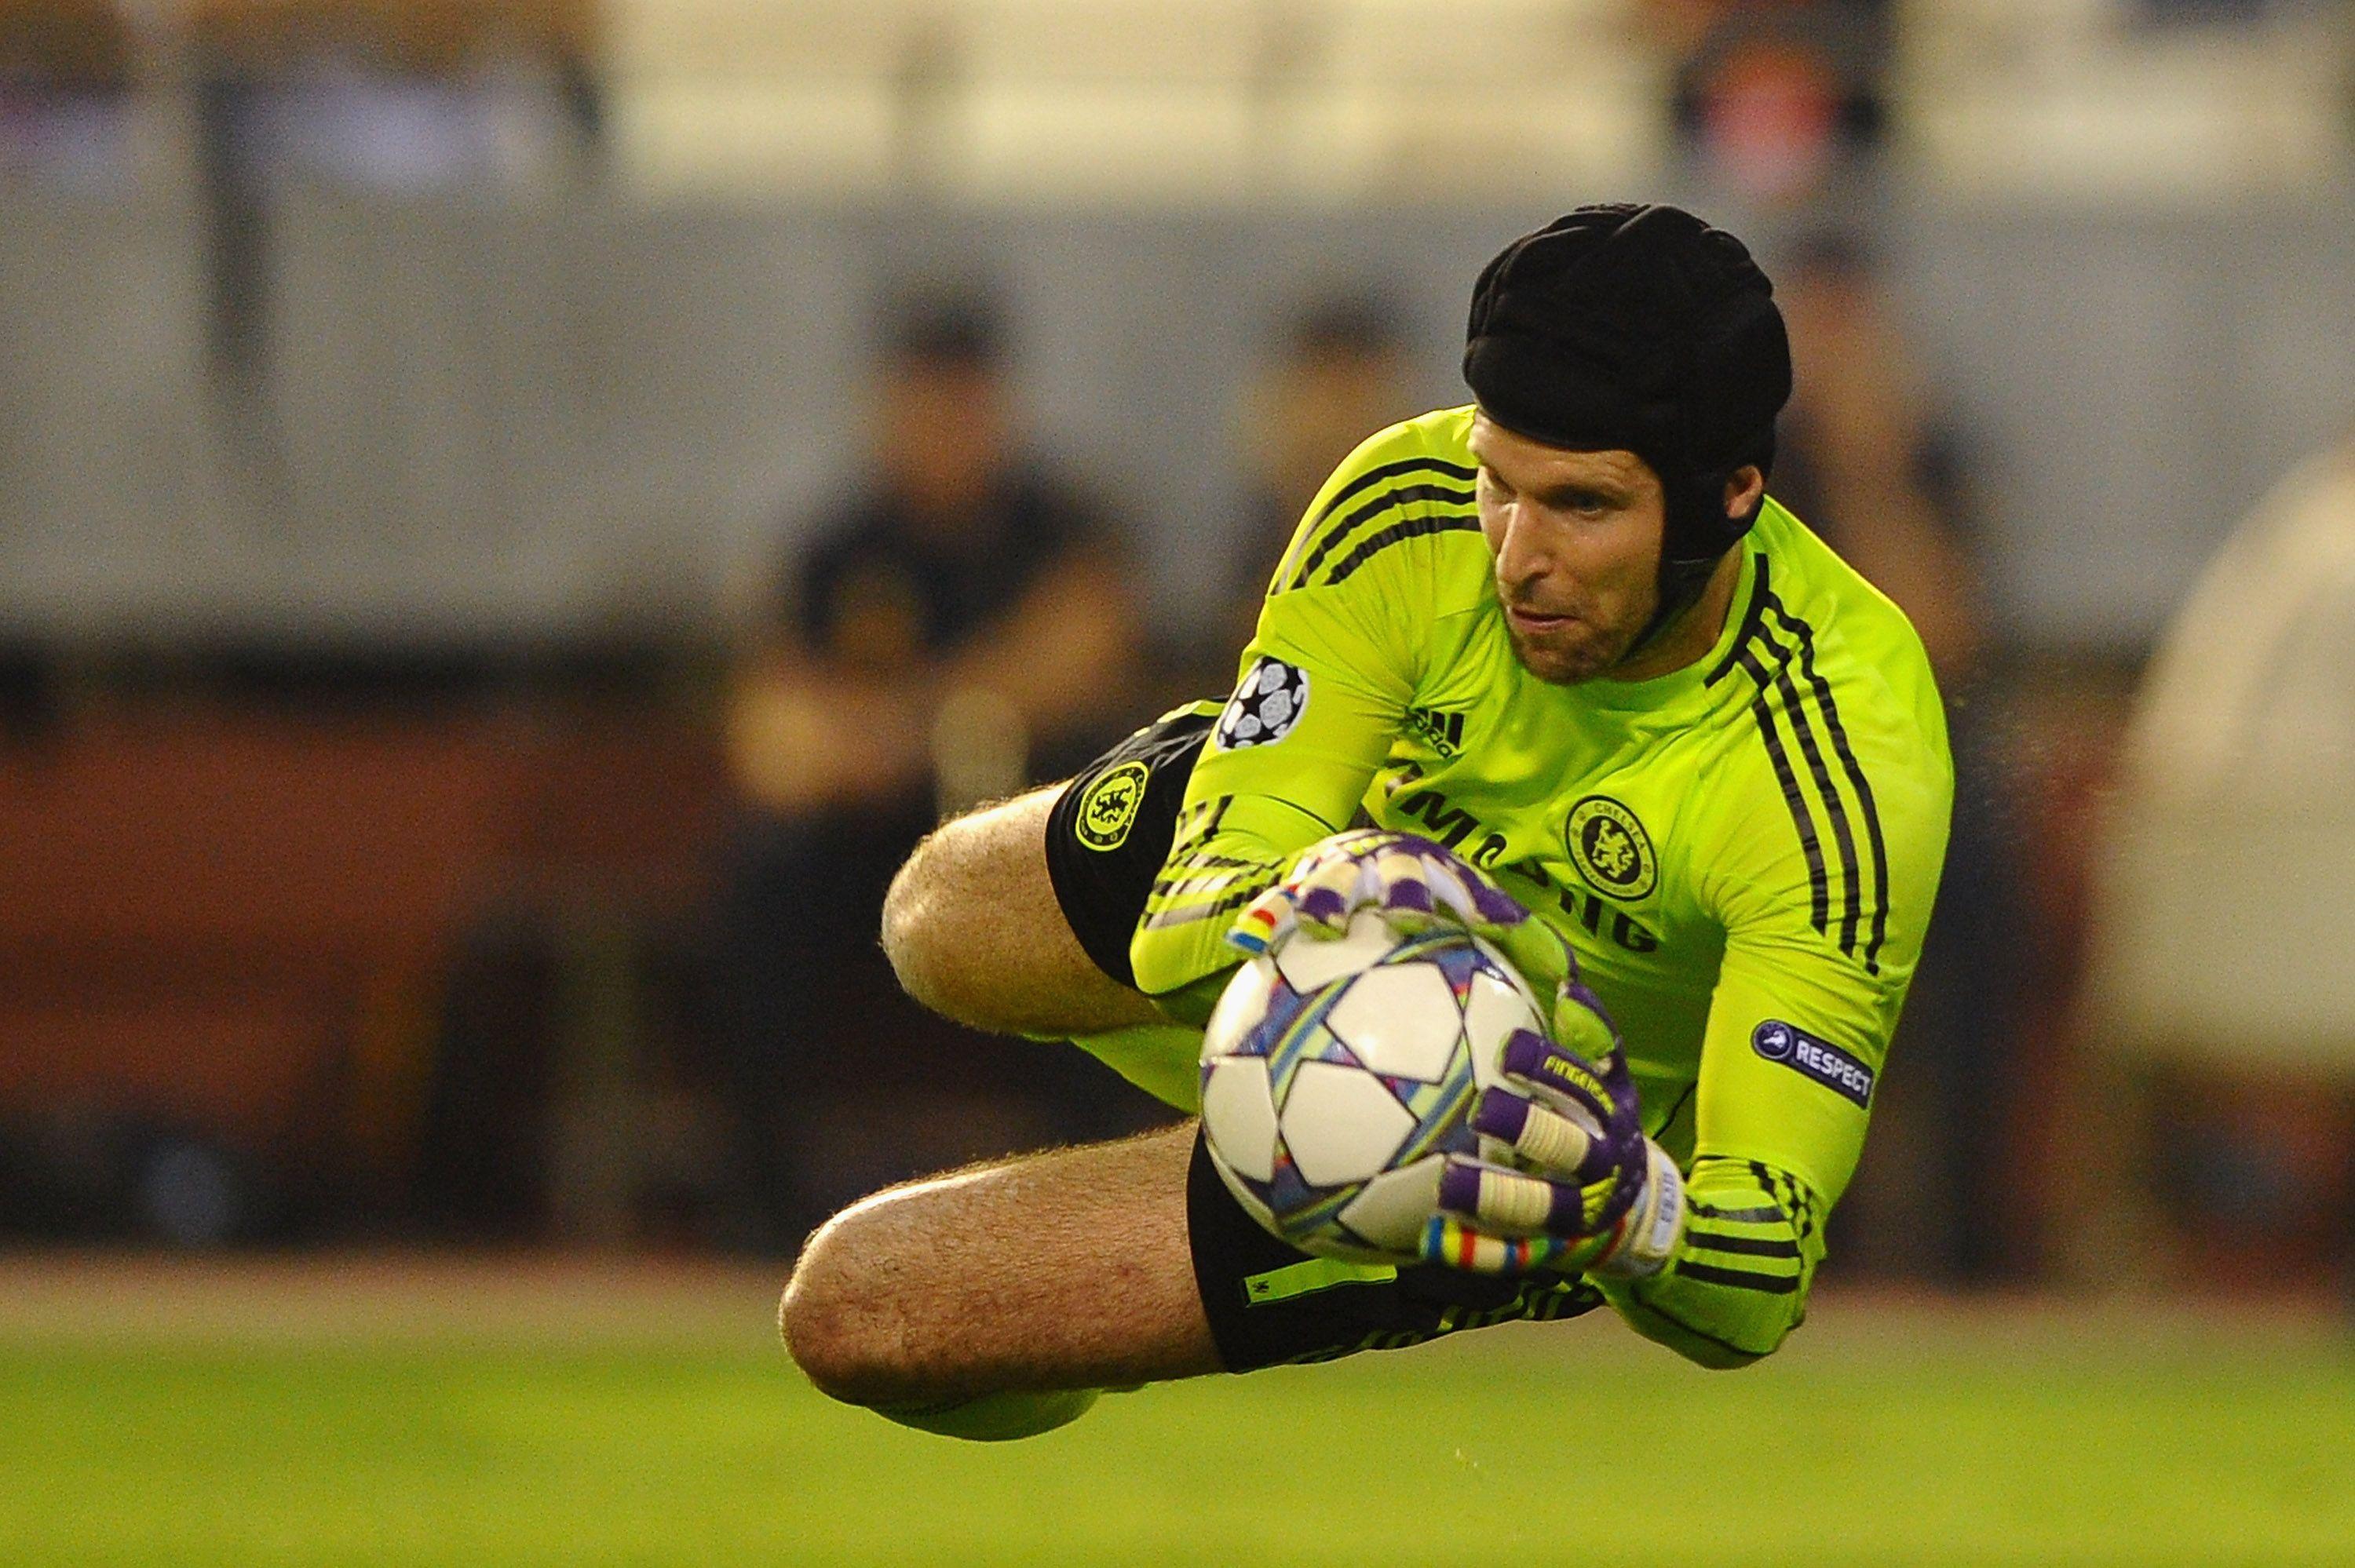 Petr Cech Wallpaper for Free Download, 50 Petr Cech High Quality